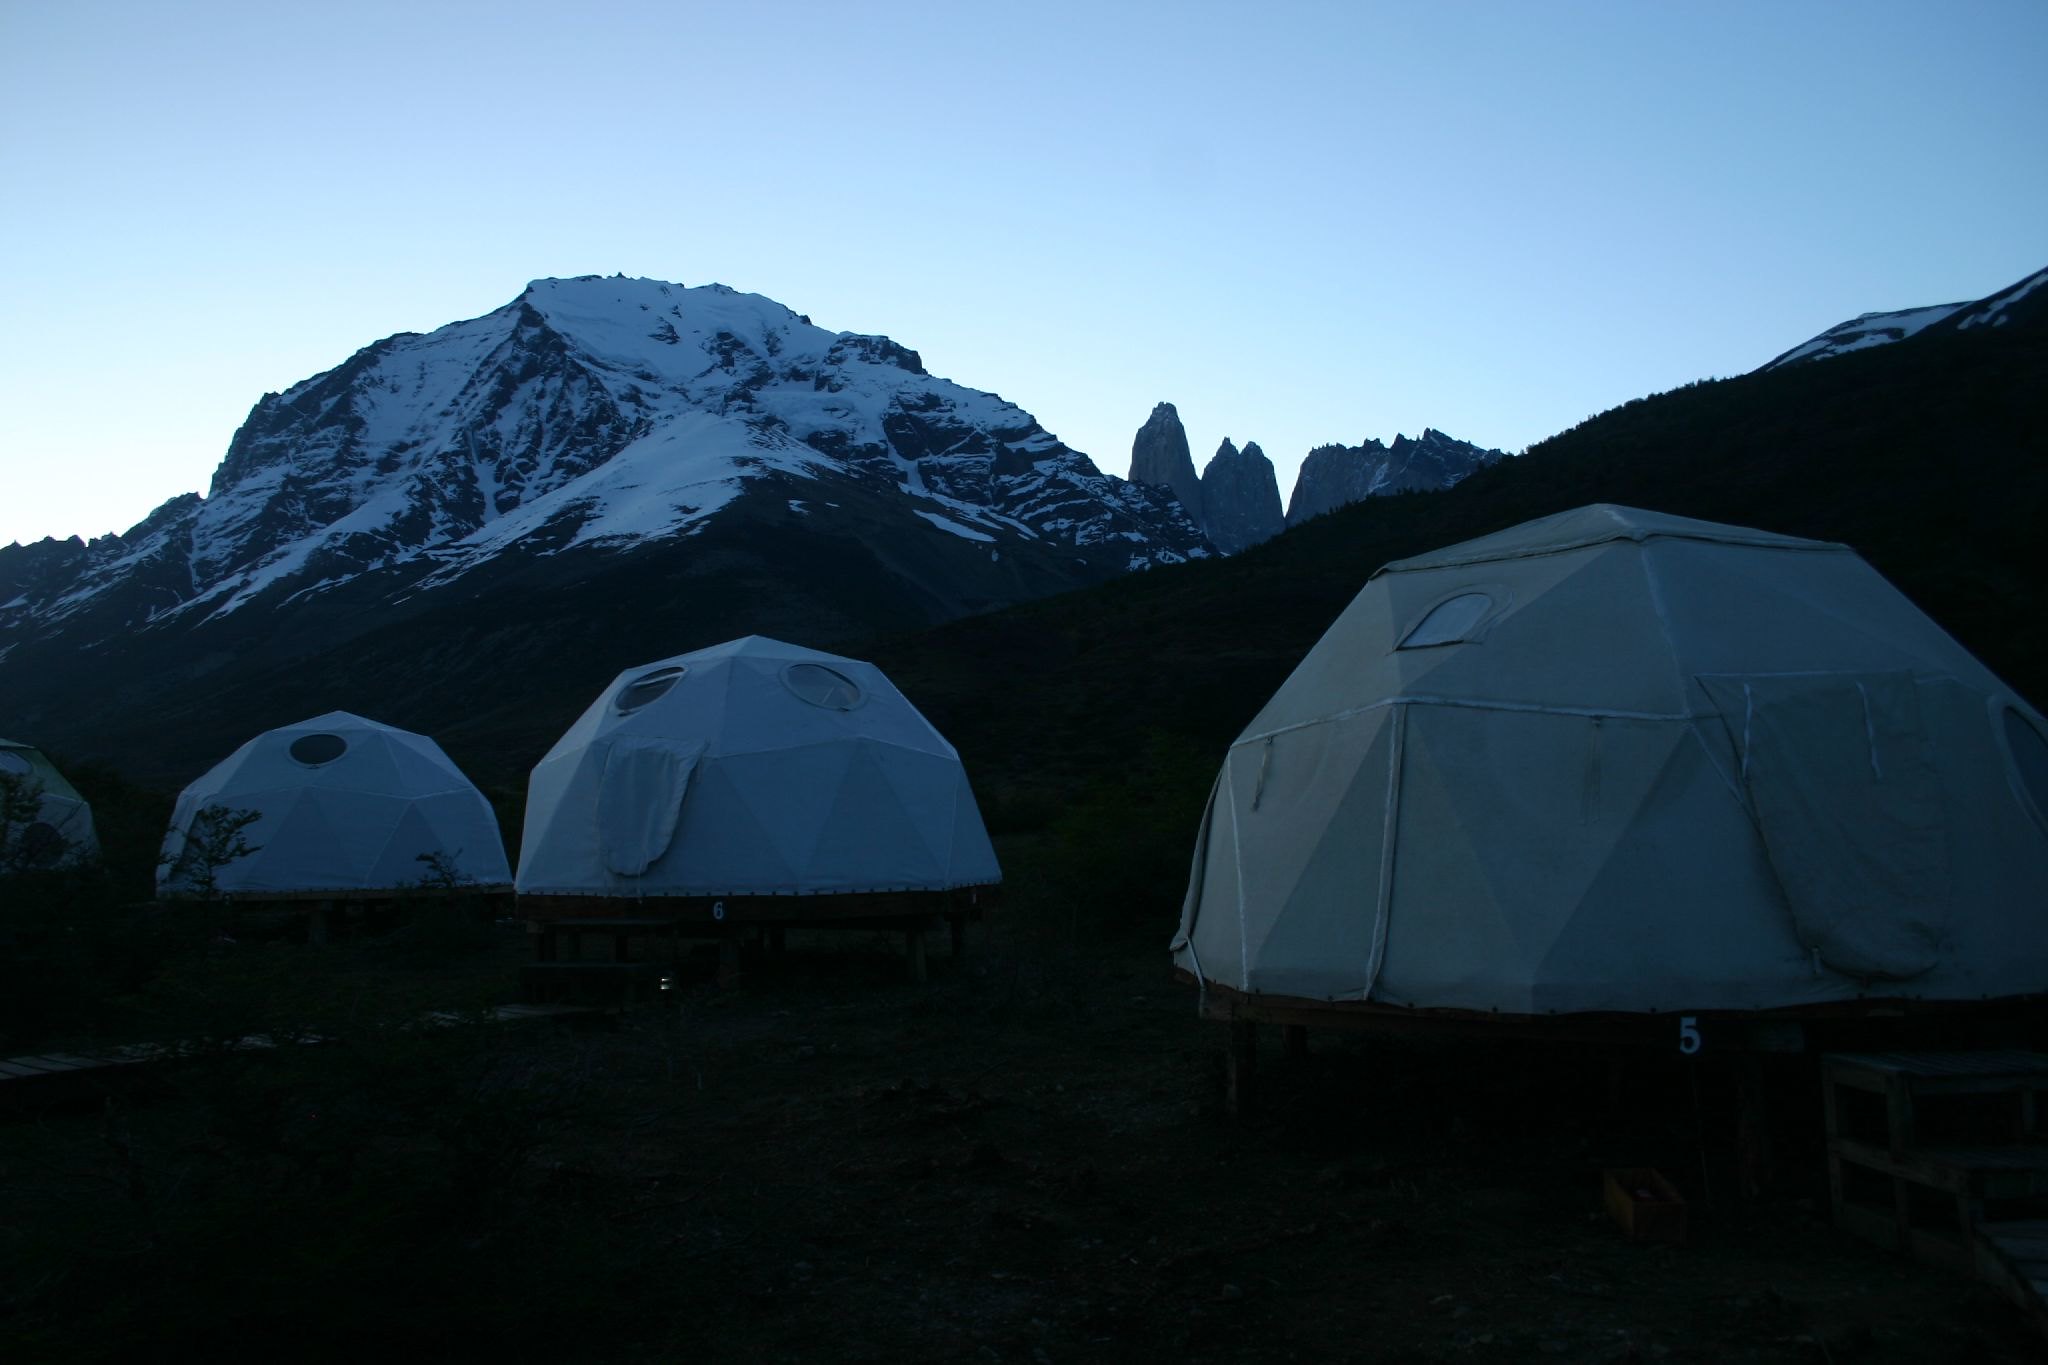 <p>Visitors stay in geodesic dome suites, that feature en suite bathrooms, wood stoves, and open terraces that provide breathtaking views of the landscape. </p>  <p>The camp is<strong> designed to be carbon-neautral</strong>, and all electricity is provided via photovoltaic panels and micro-hydro turbines. They also have a strict recycling program and use composting toilets.</p>